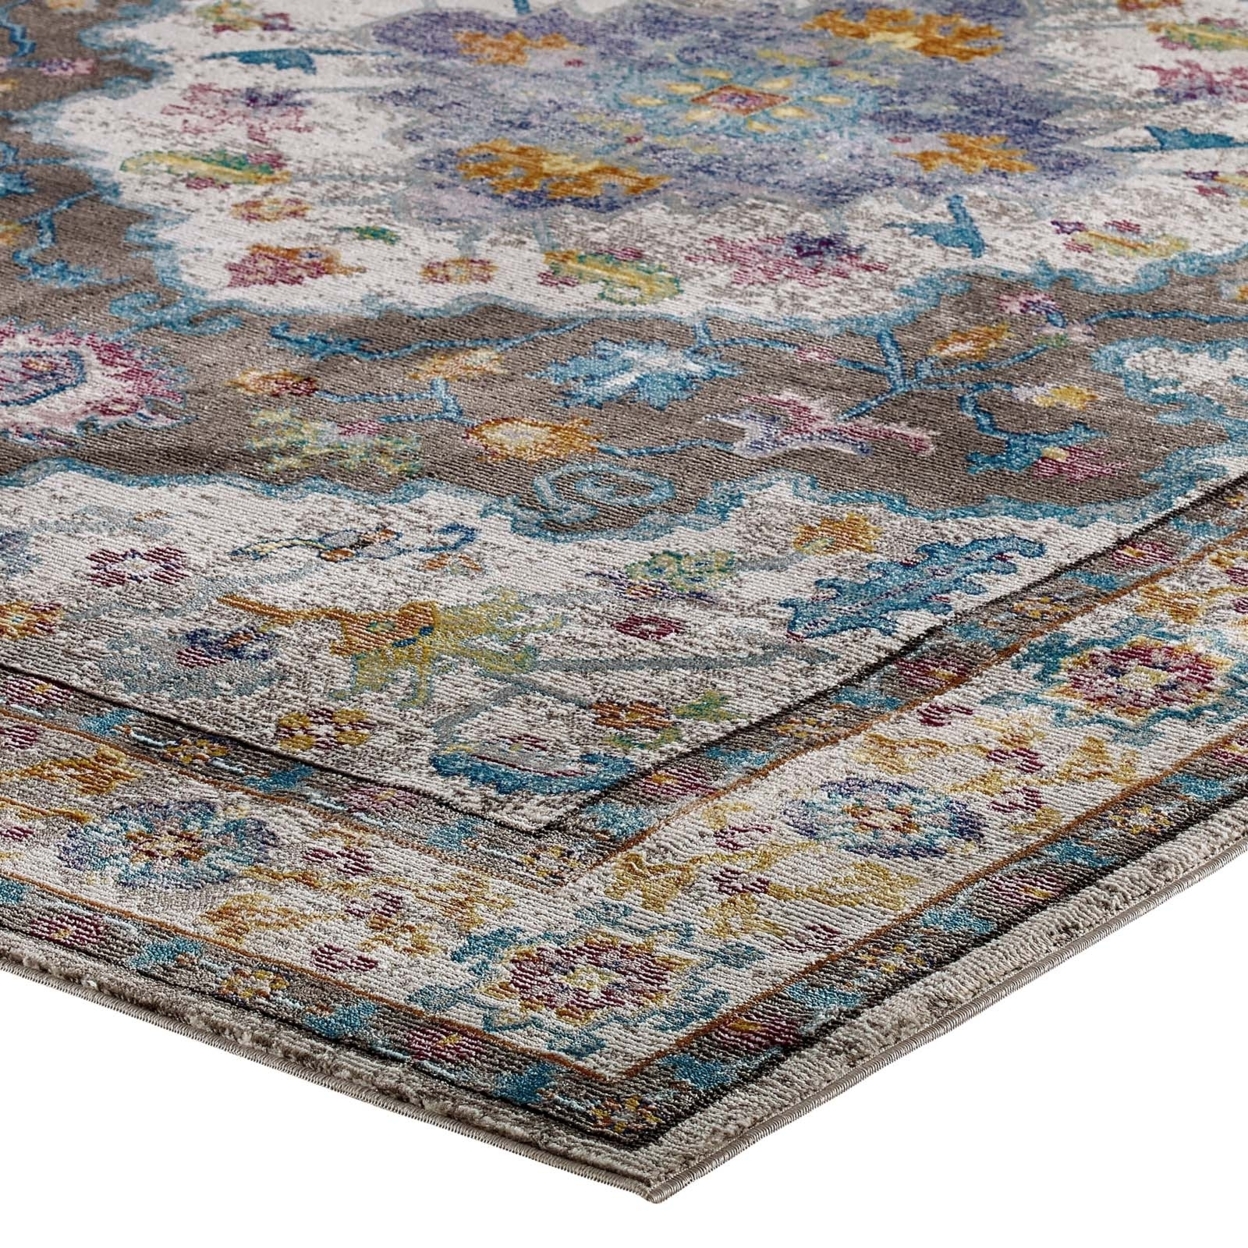 Success Anisah Distressed Floral Persian Medallion 4x6 Area Rug, Gray, Ivory, Yellow, Orange